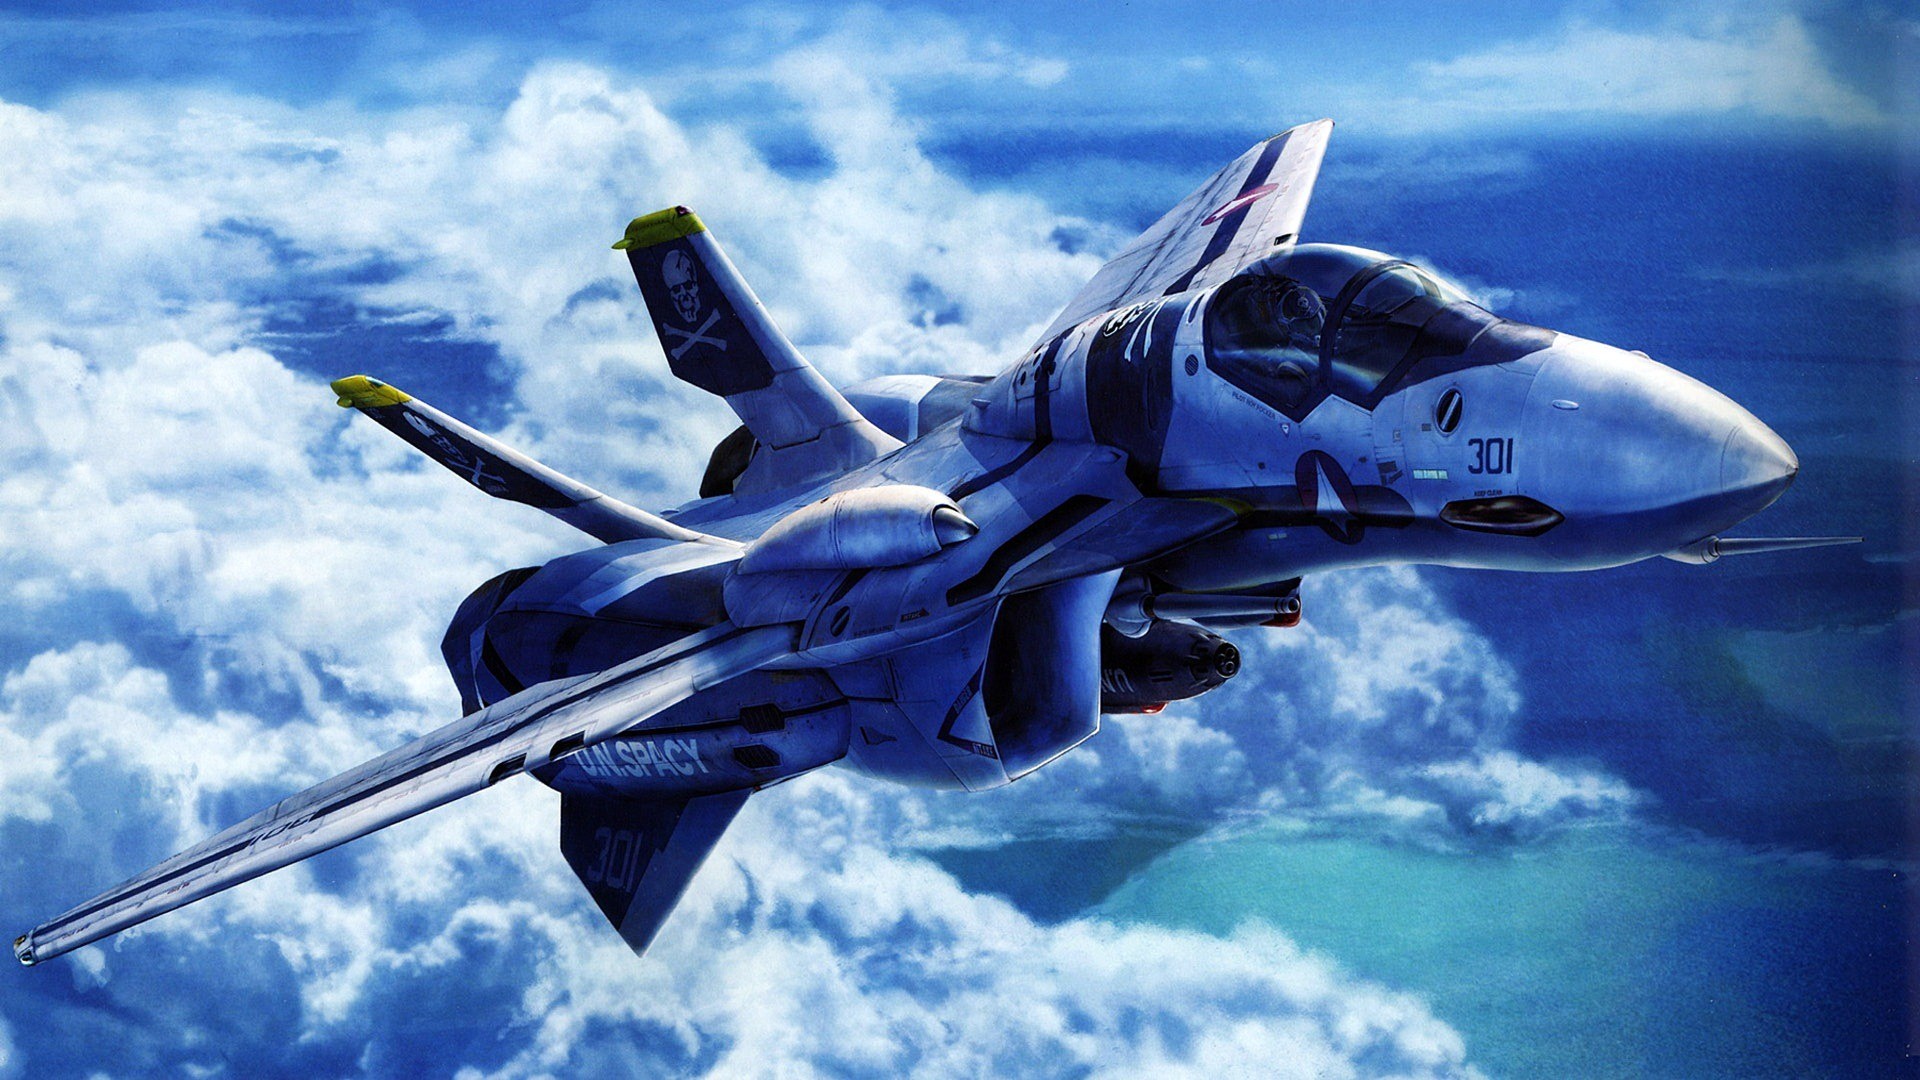 1920x1080 Airplanes Wallpapers, Aircraft, HD Wallpapers, un spacy fighter HD.jpg 1920  x 1080